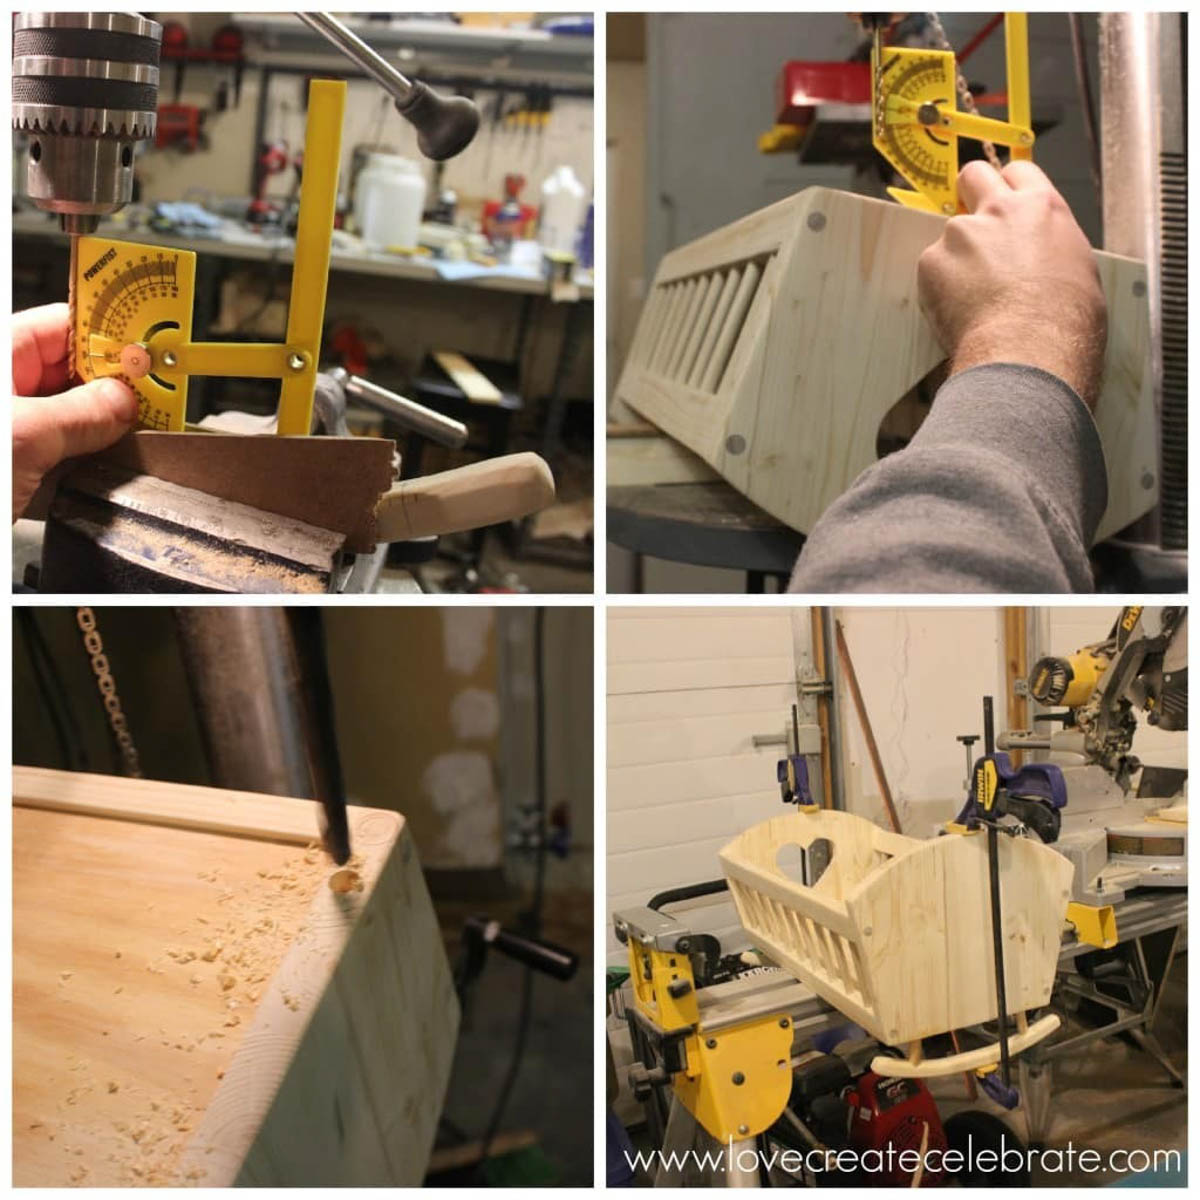 Image collage of assembling a DIY baby doll's crib